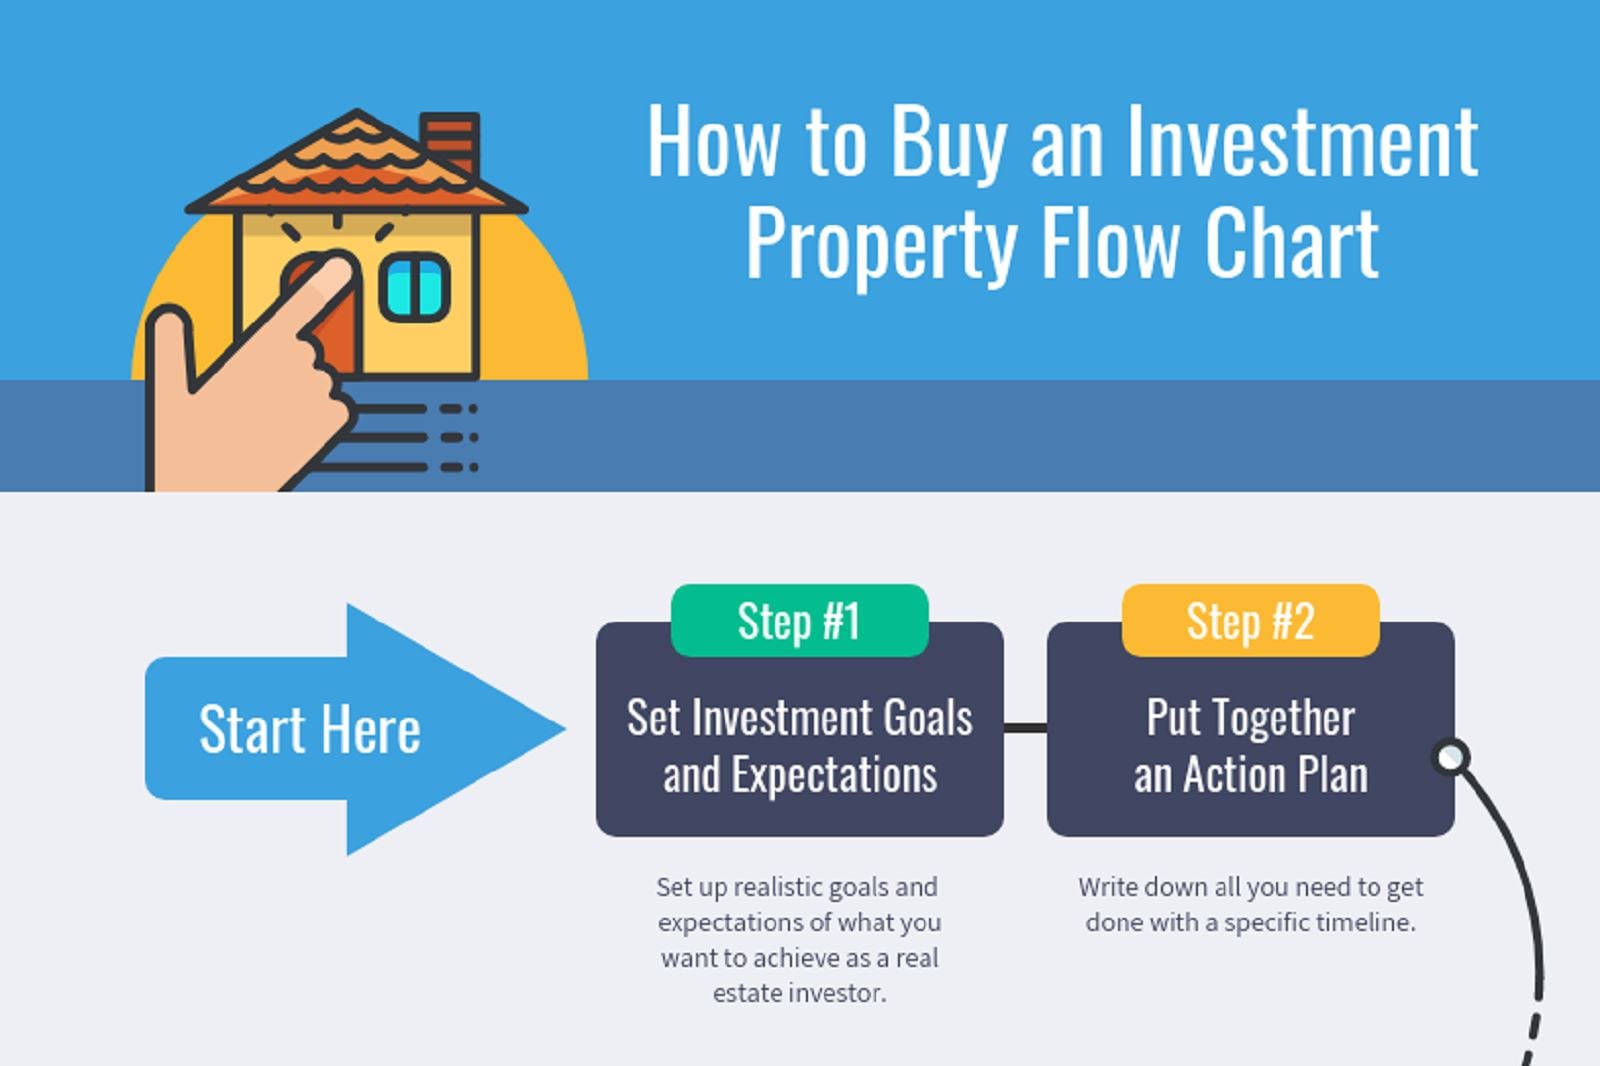 How to Buy an Investment Property?